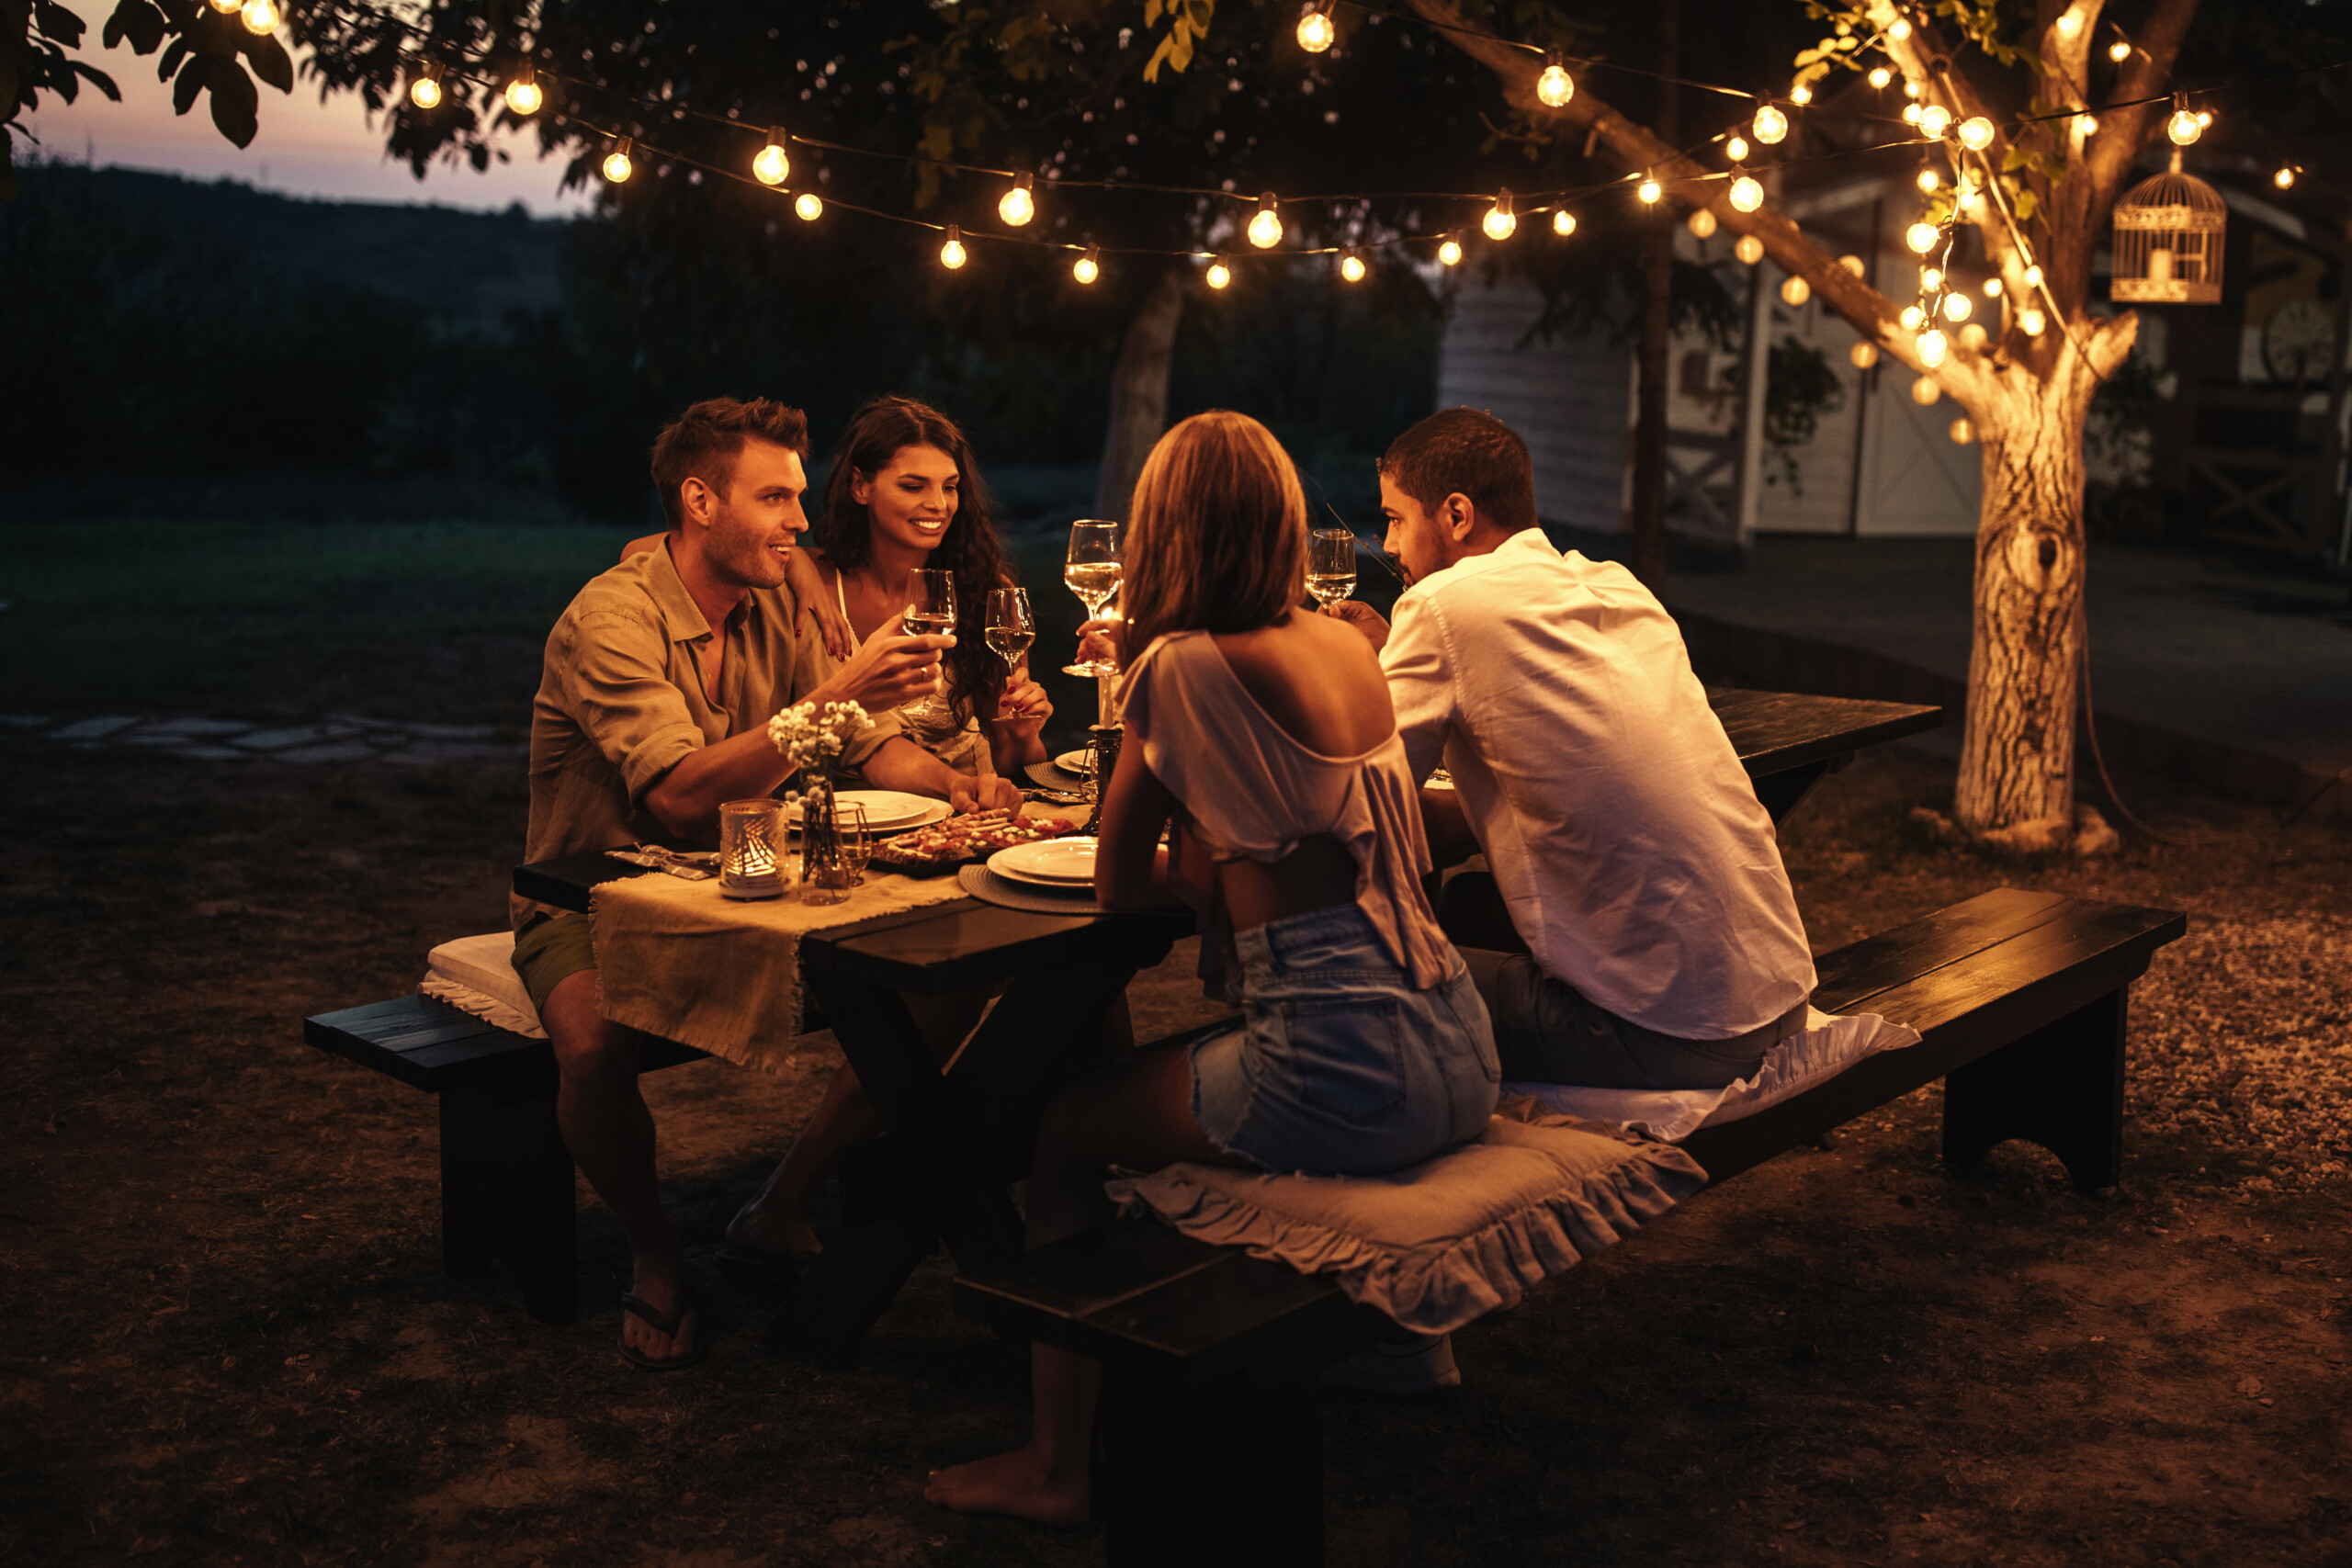 Shot,Of,Couples,Having,An,Outdoor,Dinner,Party.,Warm,Tones.